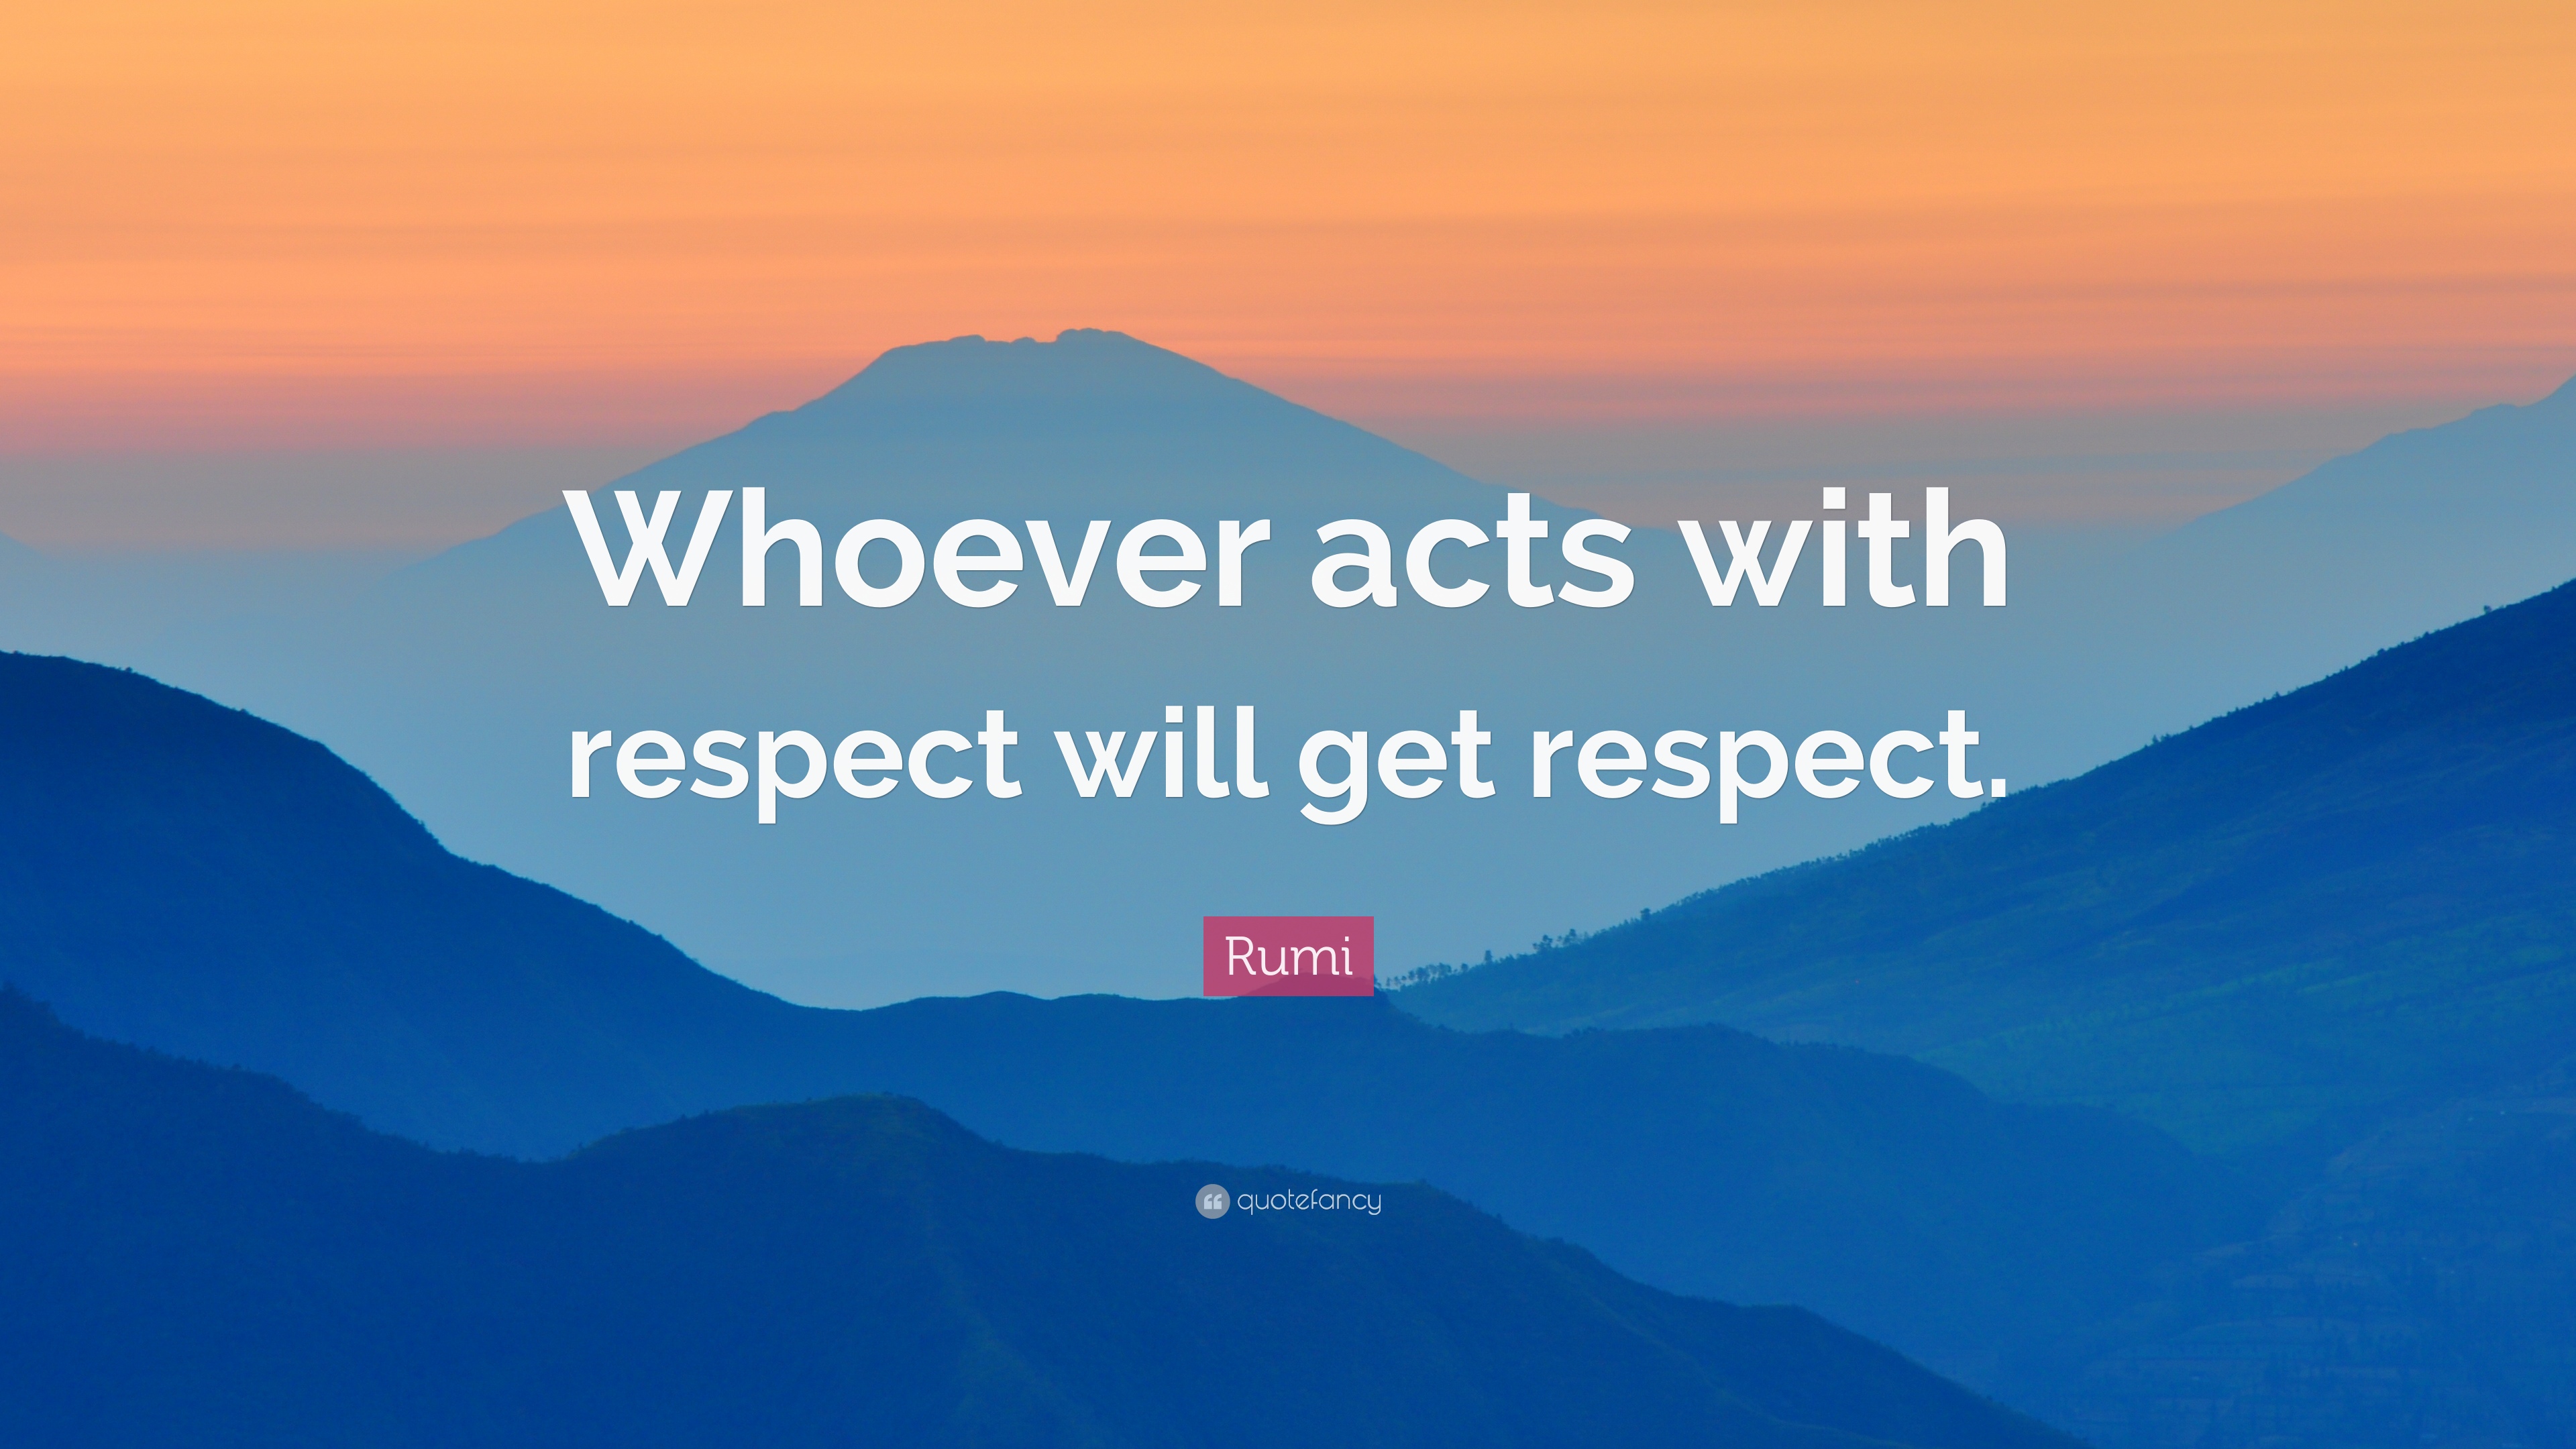 Whoever acts with respect will get respect.